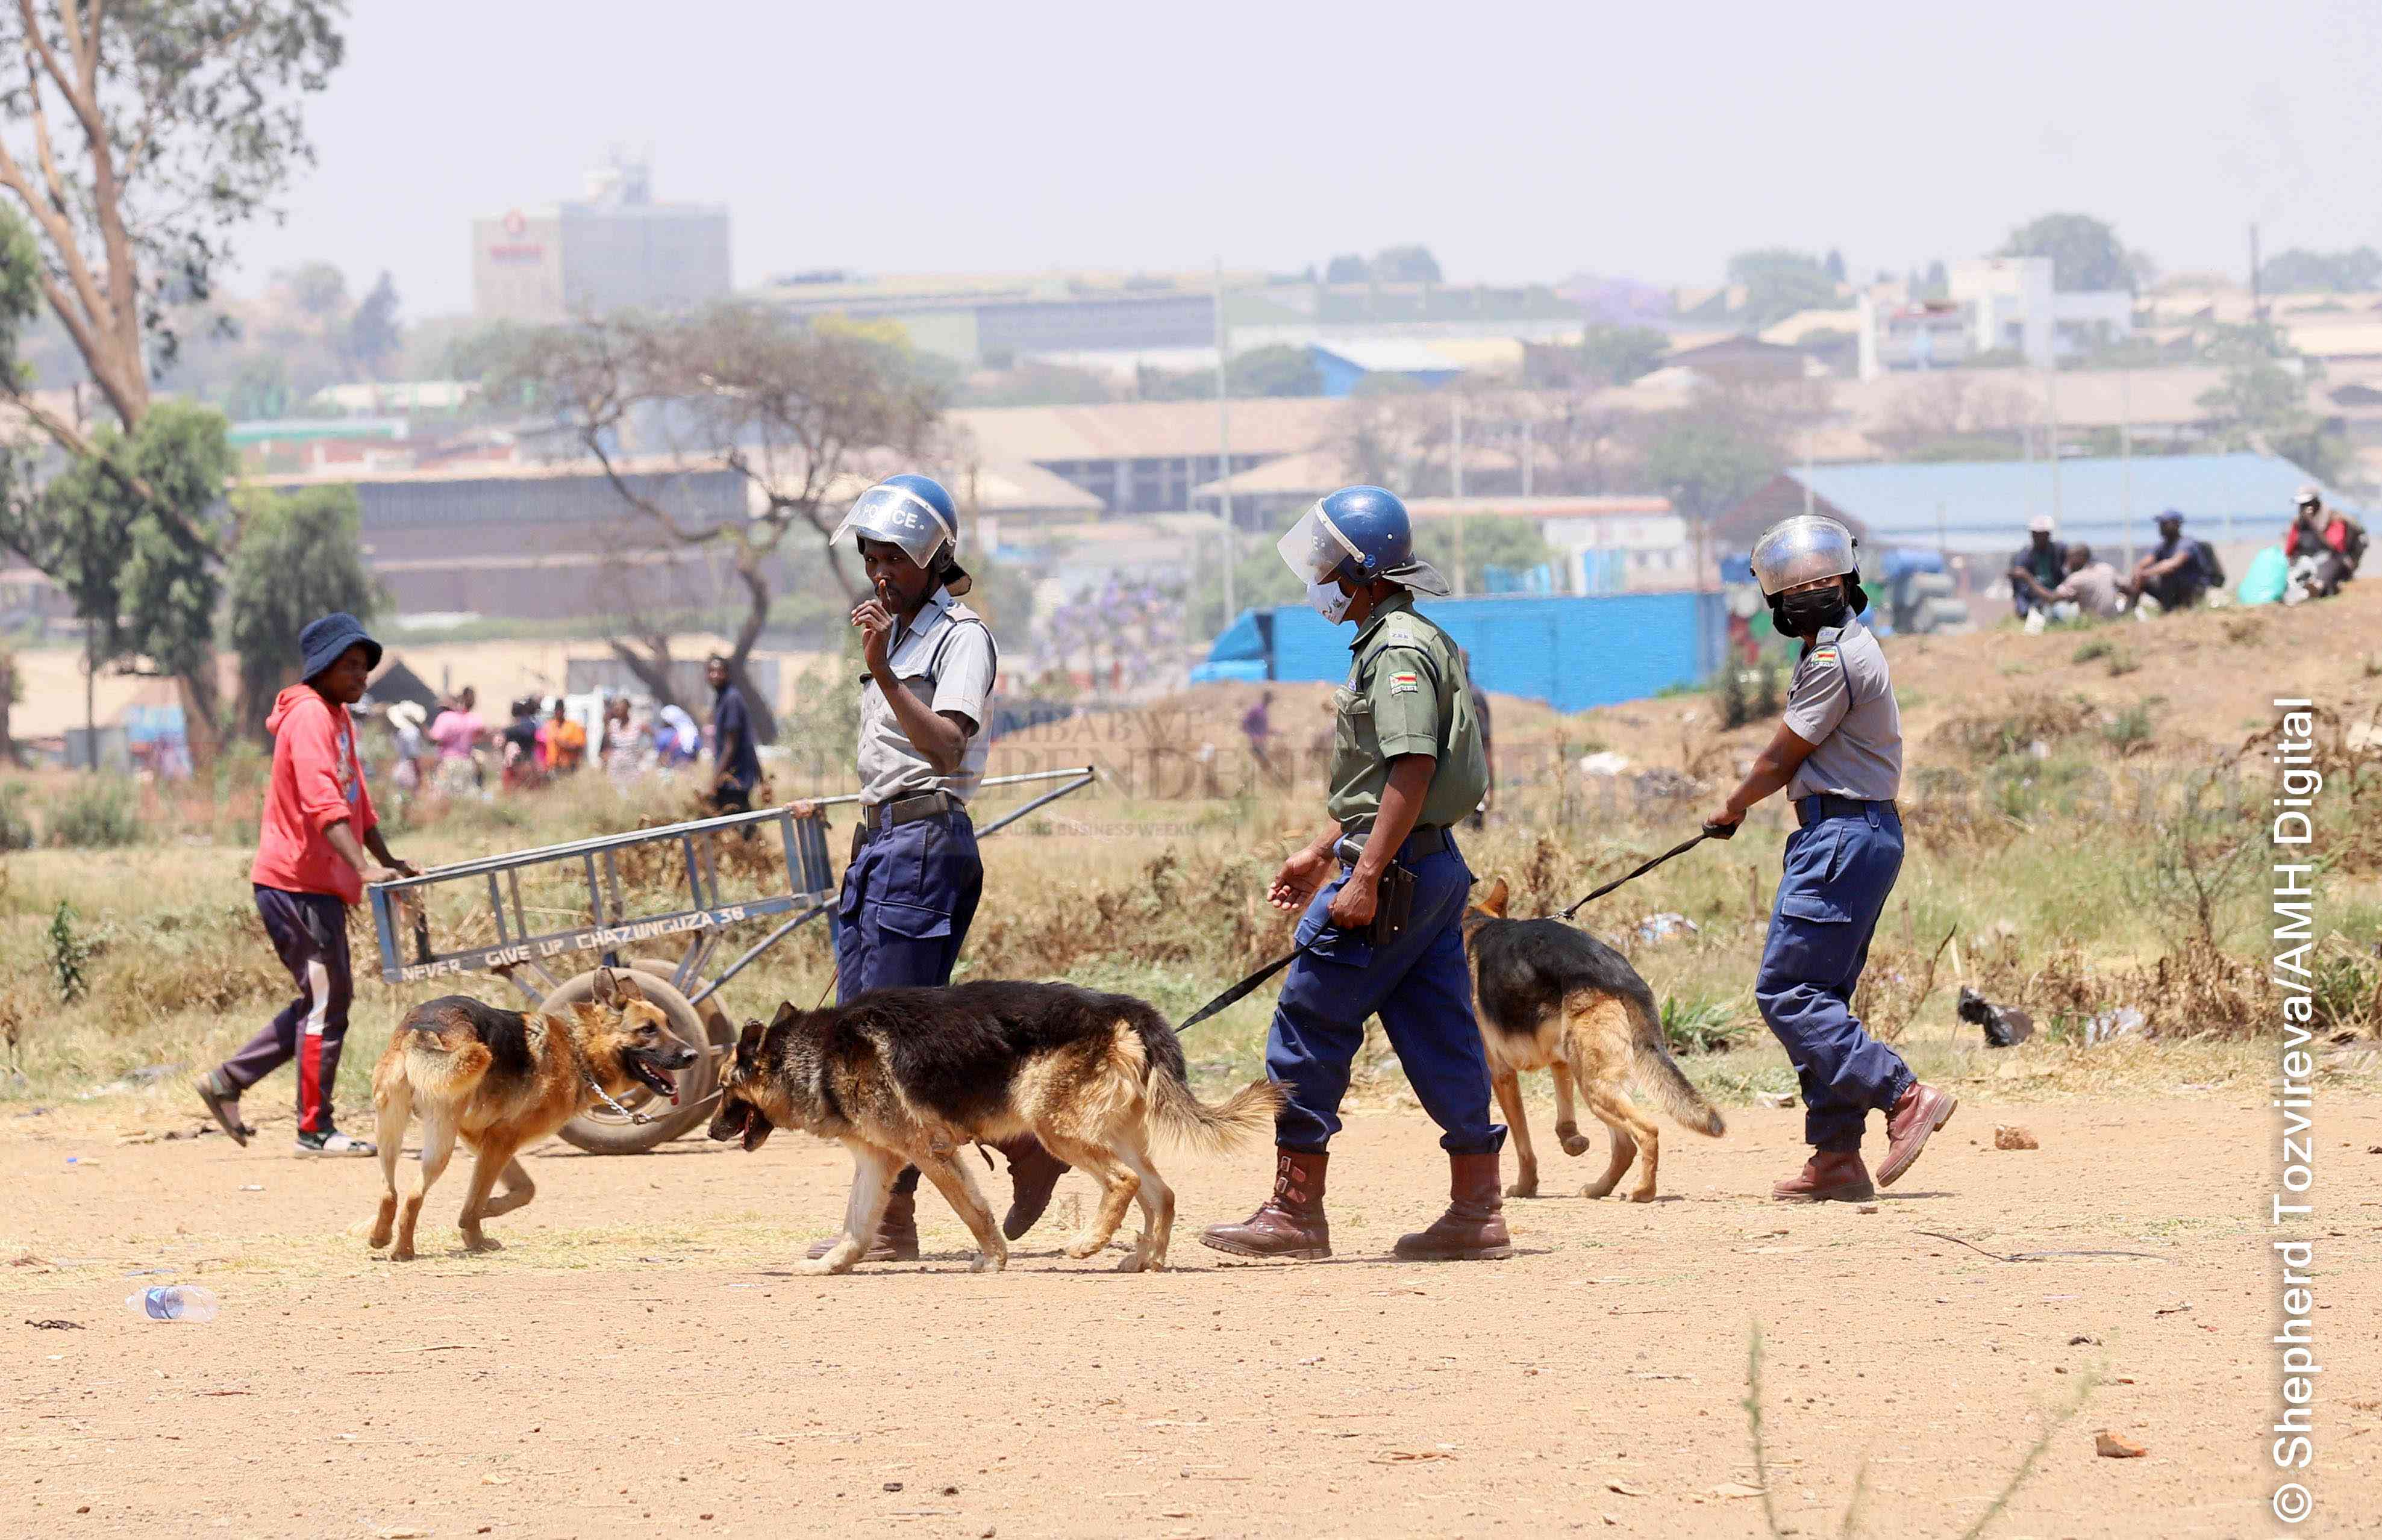 ZRP Canine Unit stepped in to restore order